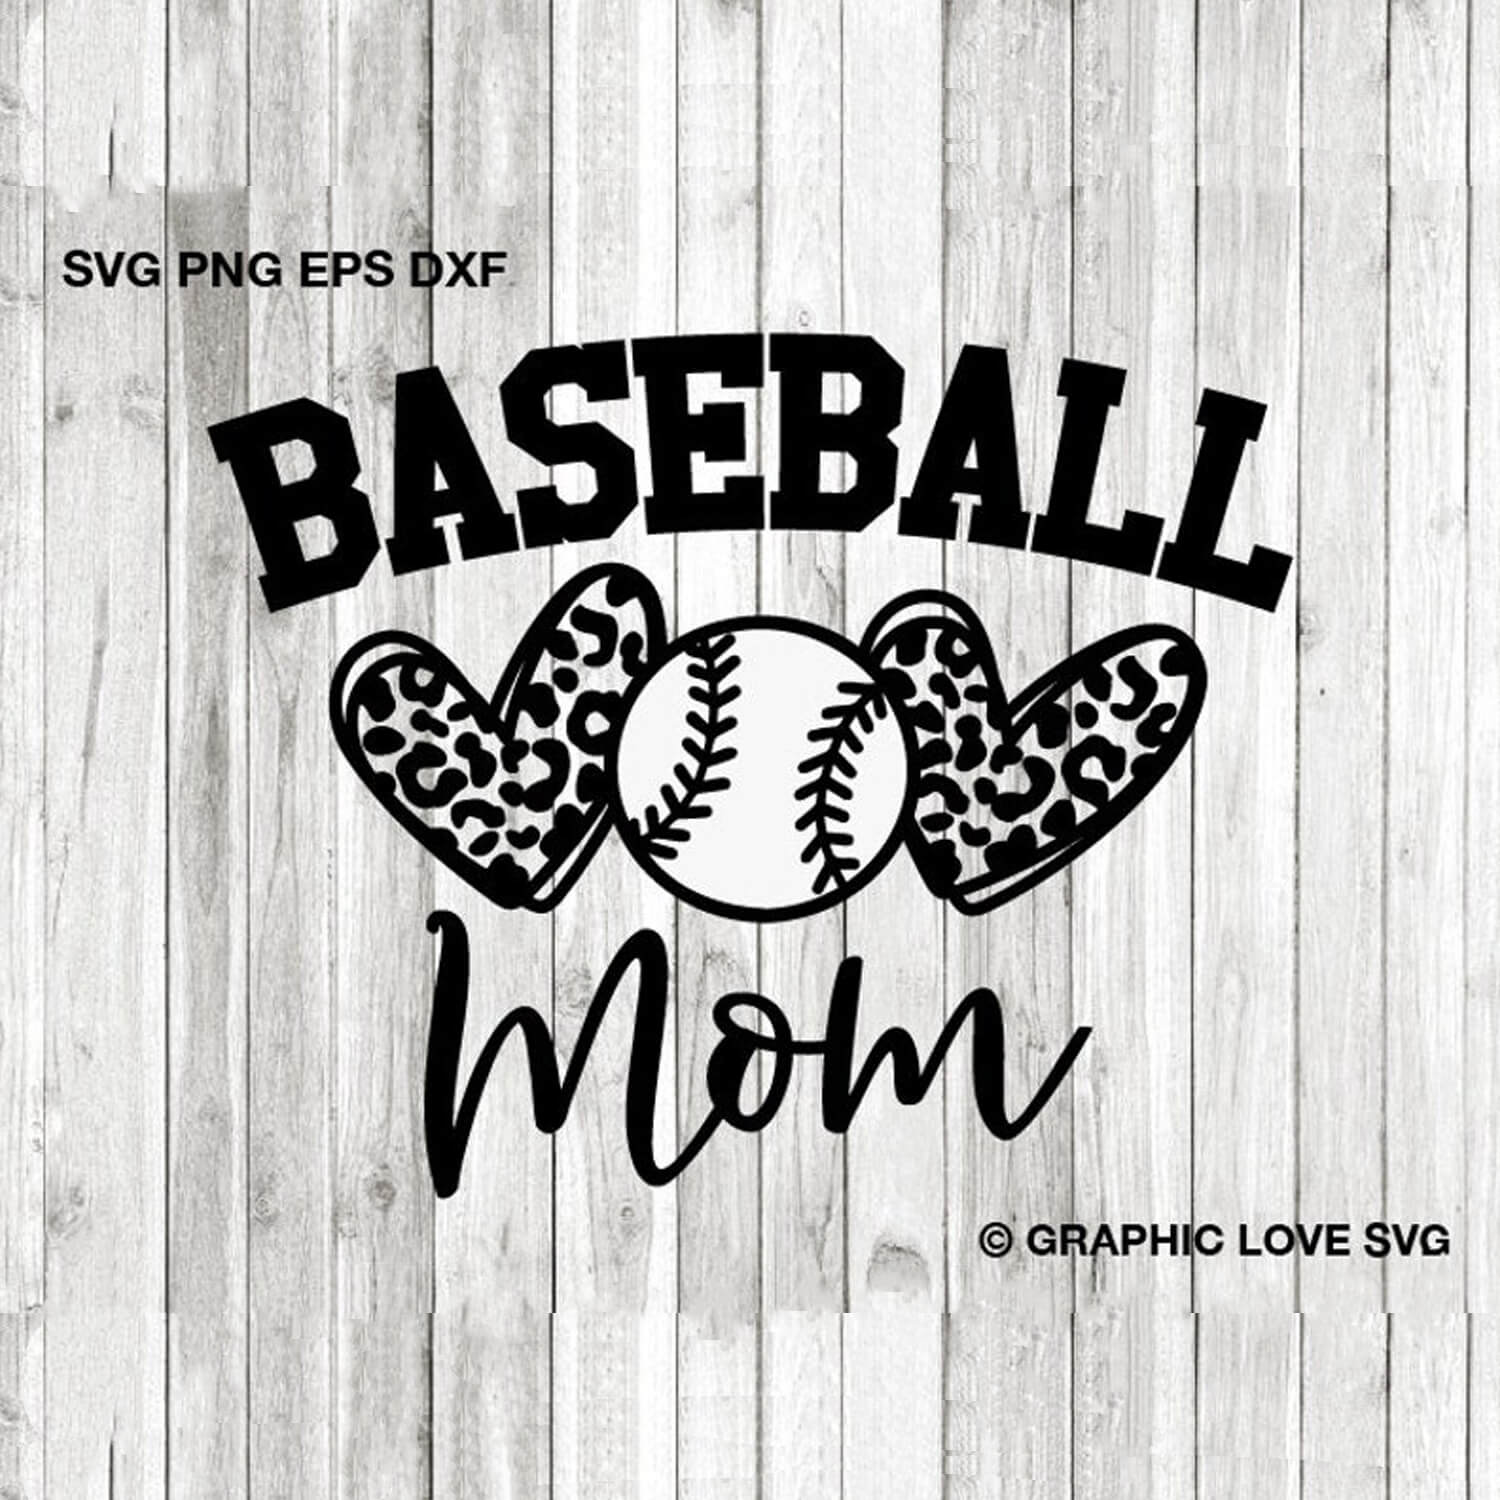 Baseball mom on the background of wooden boards.